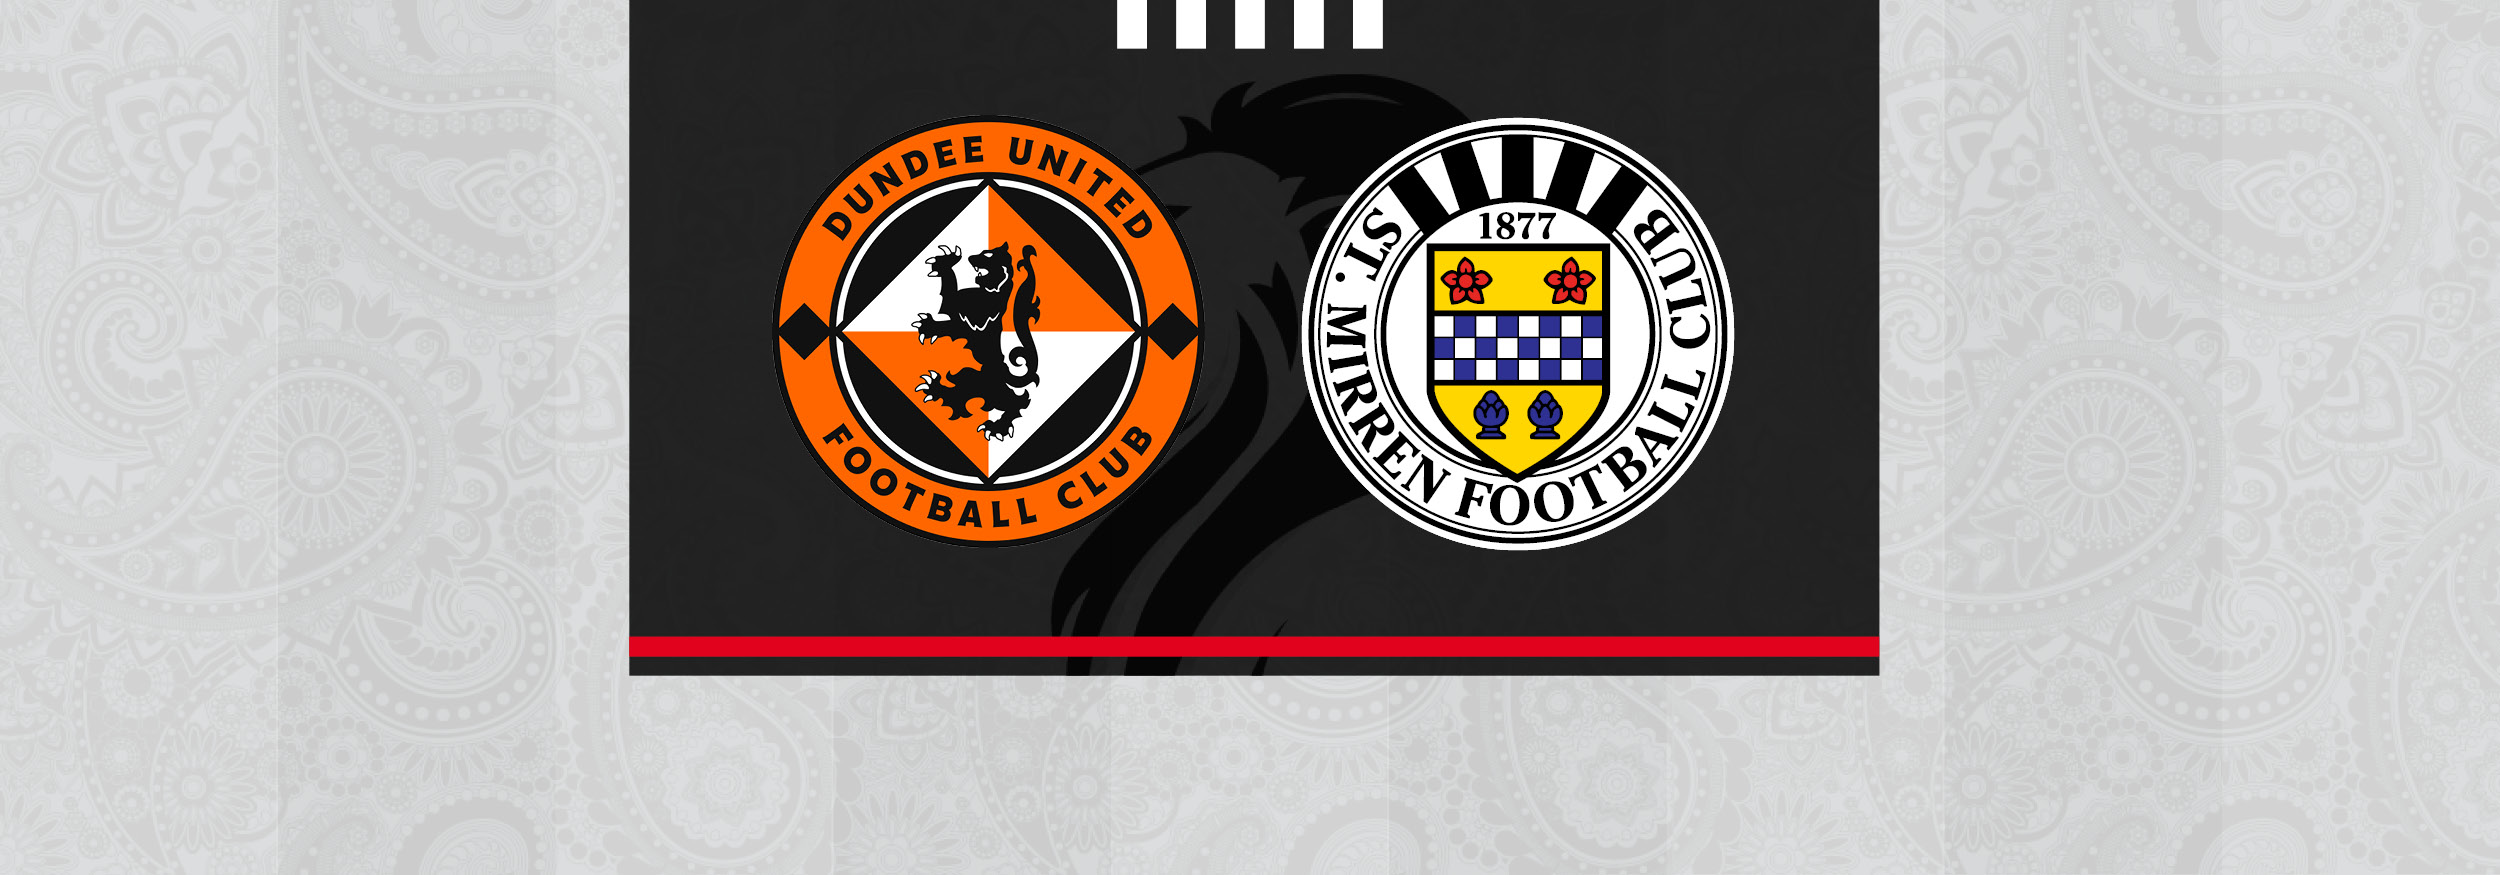 Ticket Info: Dundee United v St Mirren (18th March)